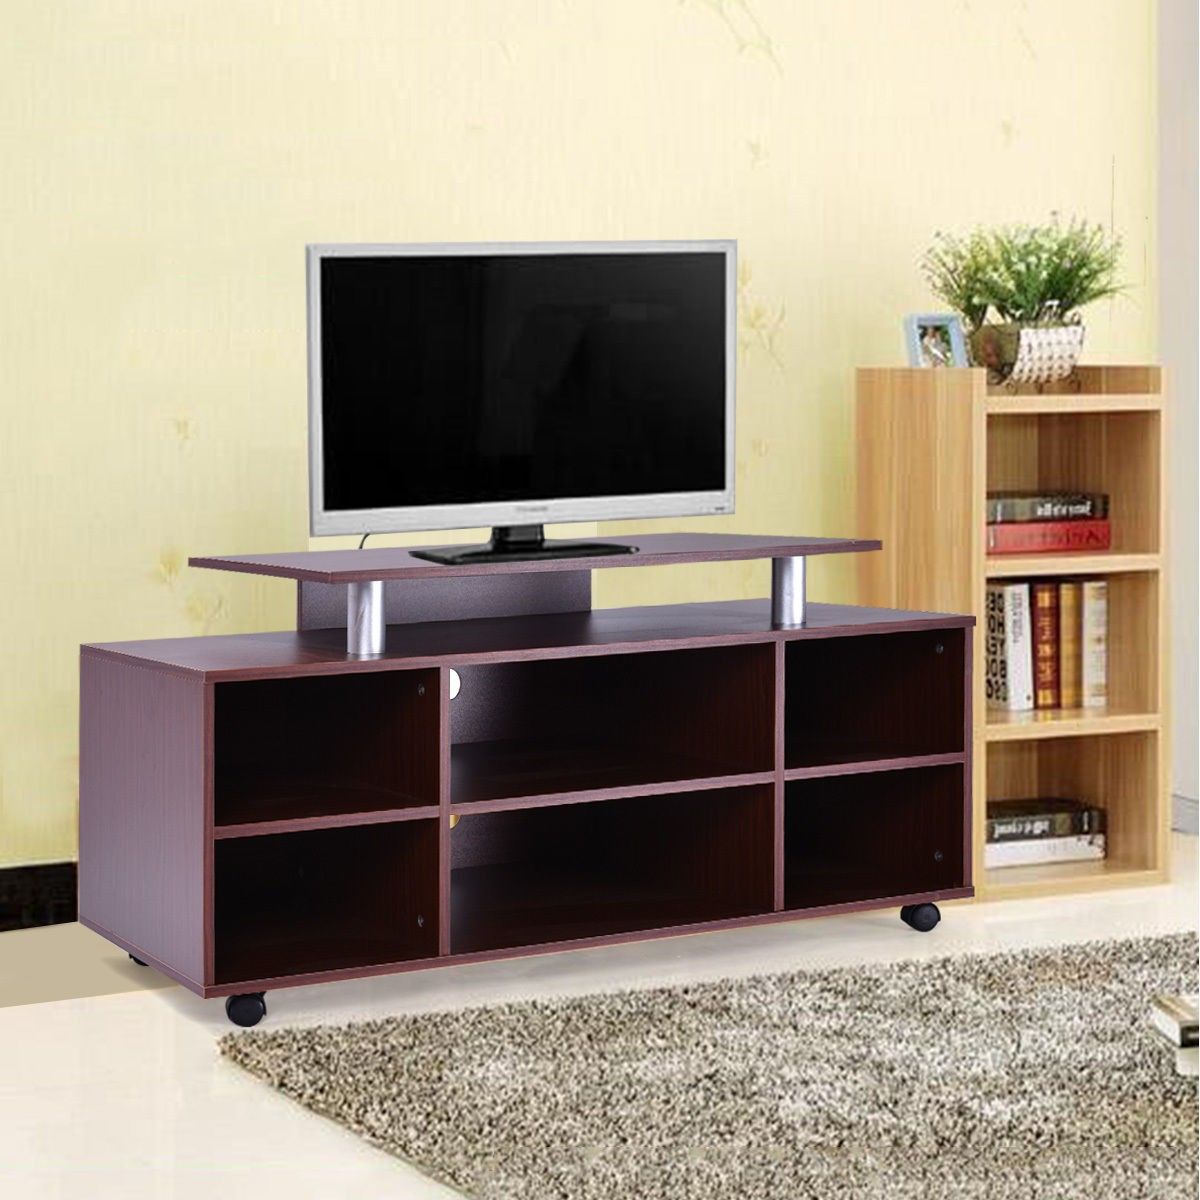 Wheeled Tv Stand Entertainment Center Media Console Regarding Tv Media Stands (View 1 of 15)